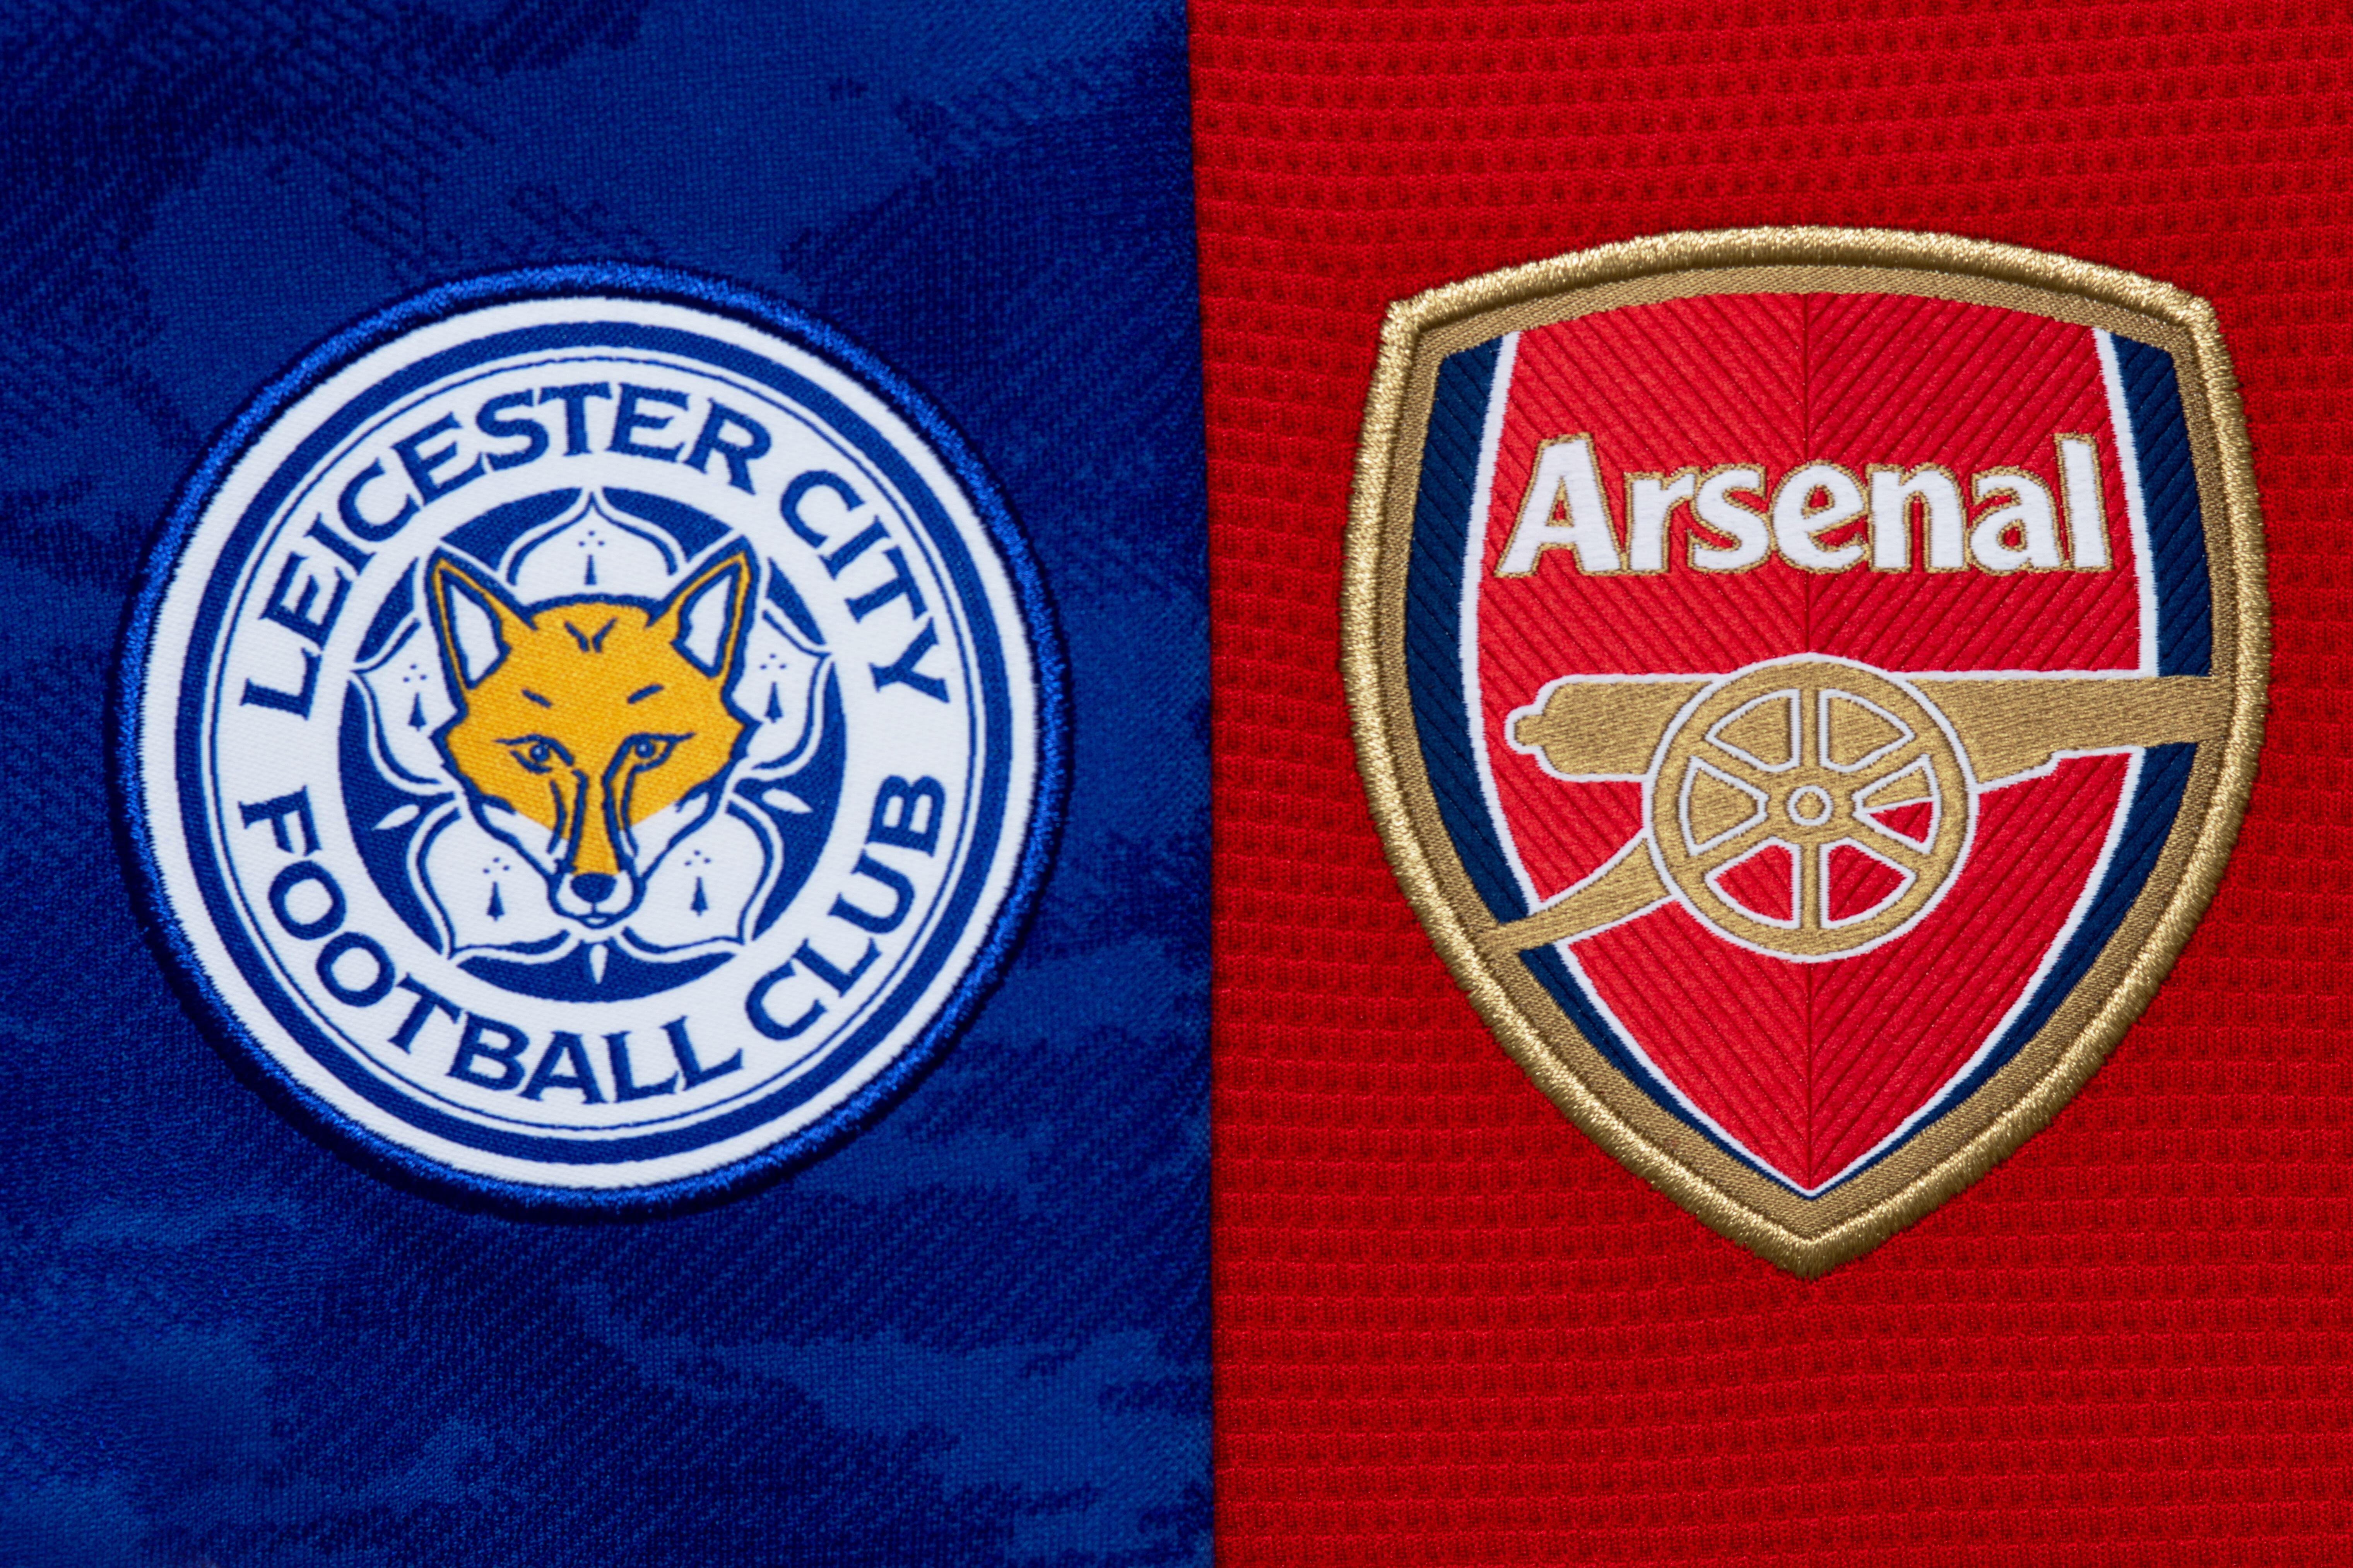 Leicester City 0-1 Arsenal Match report, player ratings, expert analysis, fan reaction and more